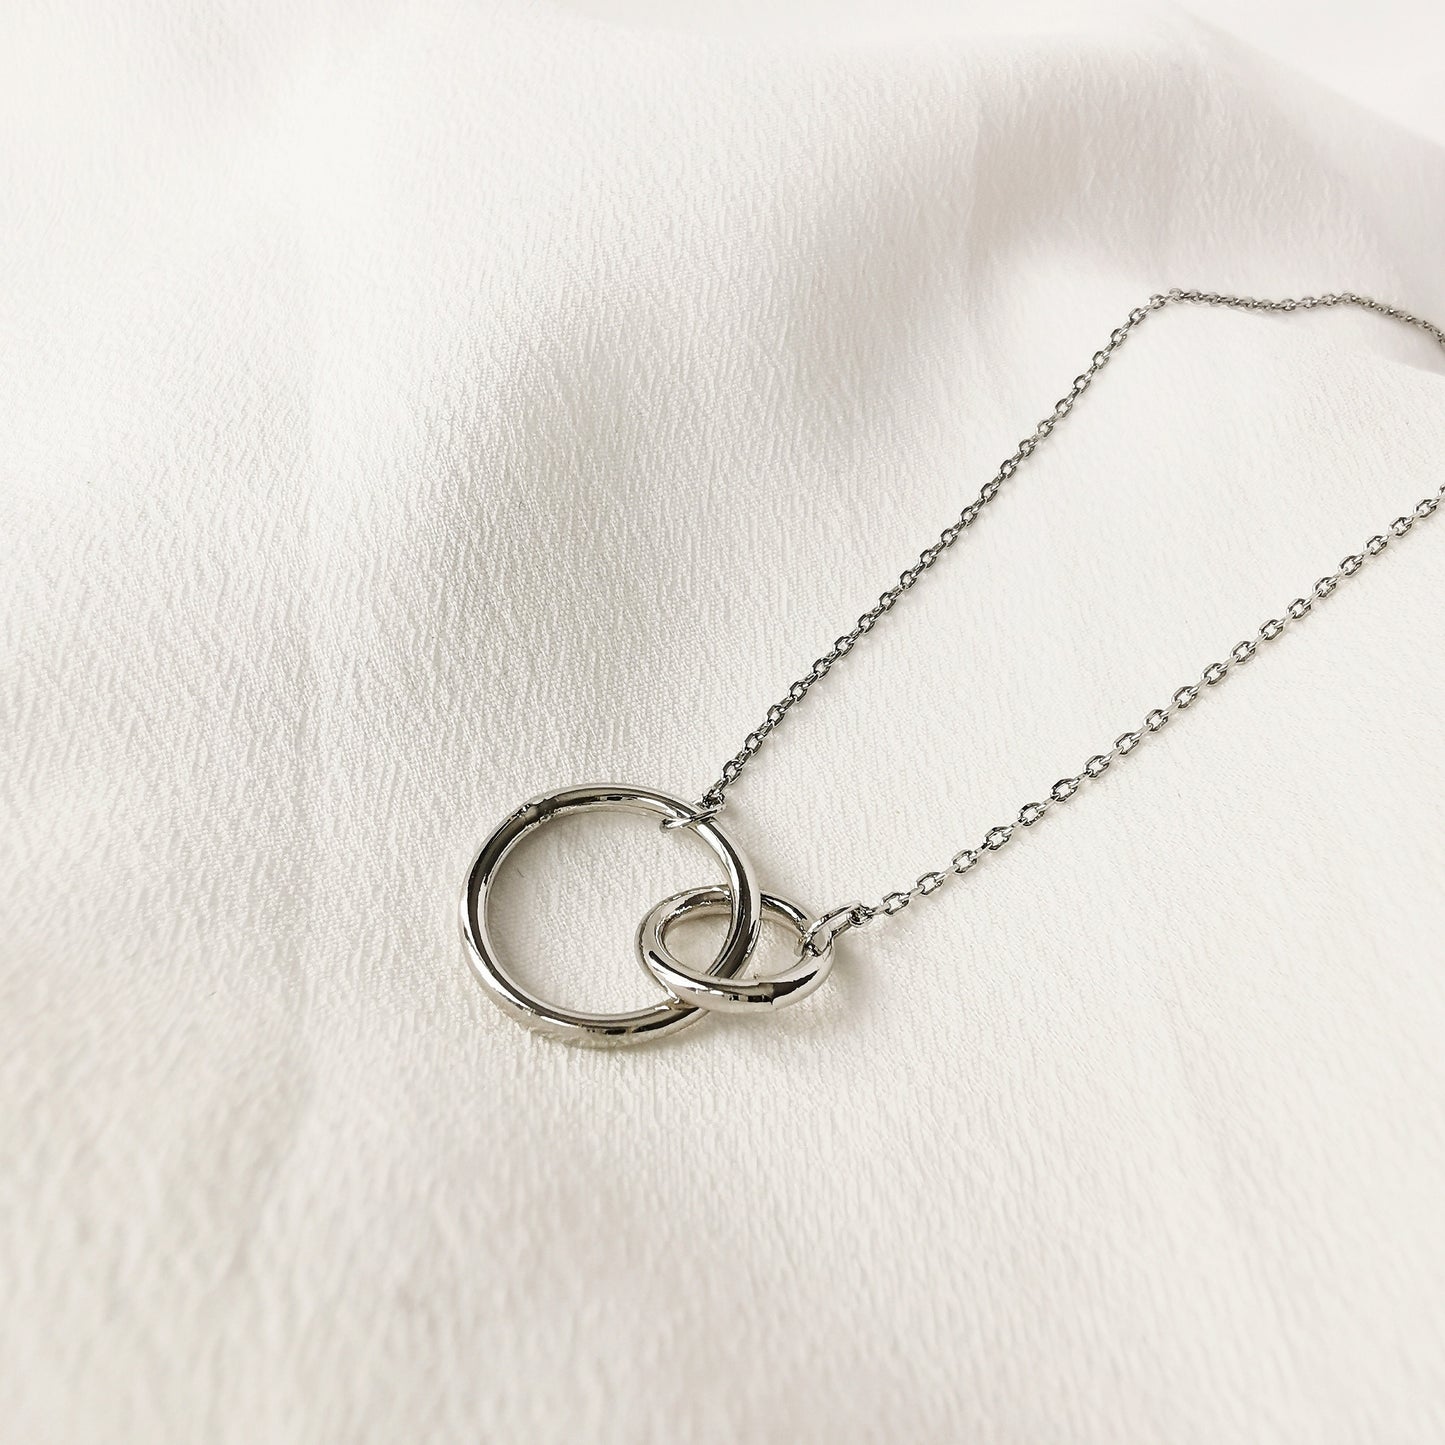 Sterling Silver Friends Necklace / Handcraft Interlinking Circle Necklace / Special Friends Gift / Best Friends Gift Birthday Gift For Her